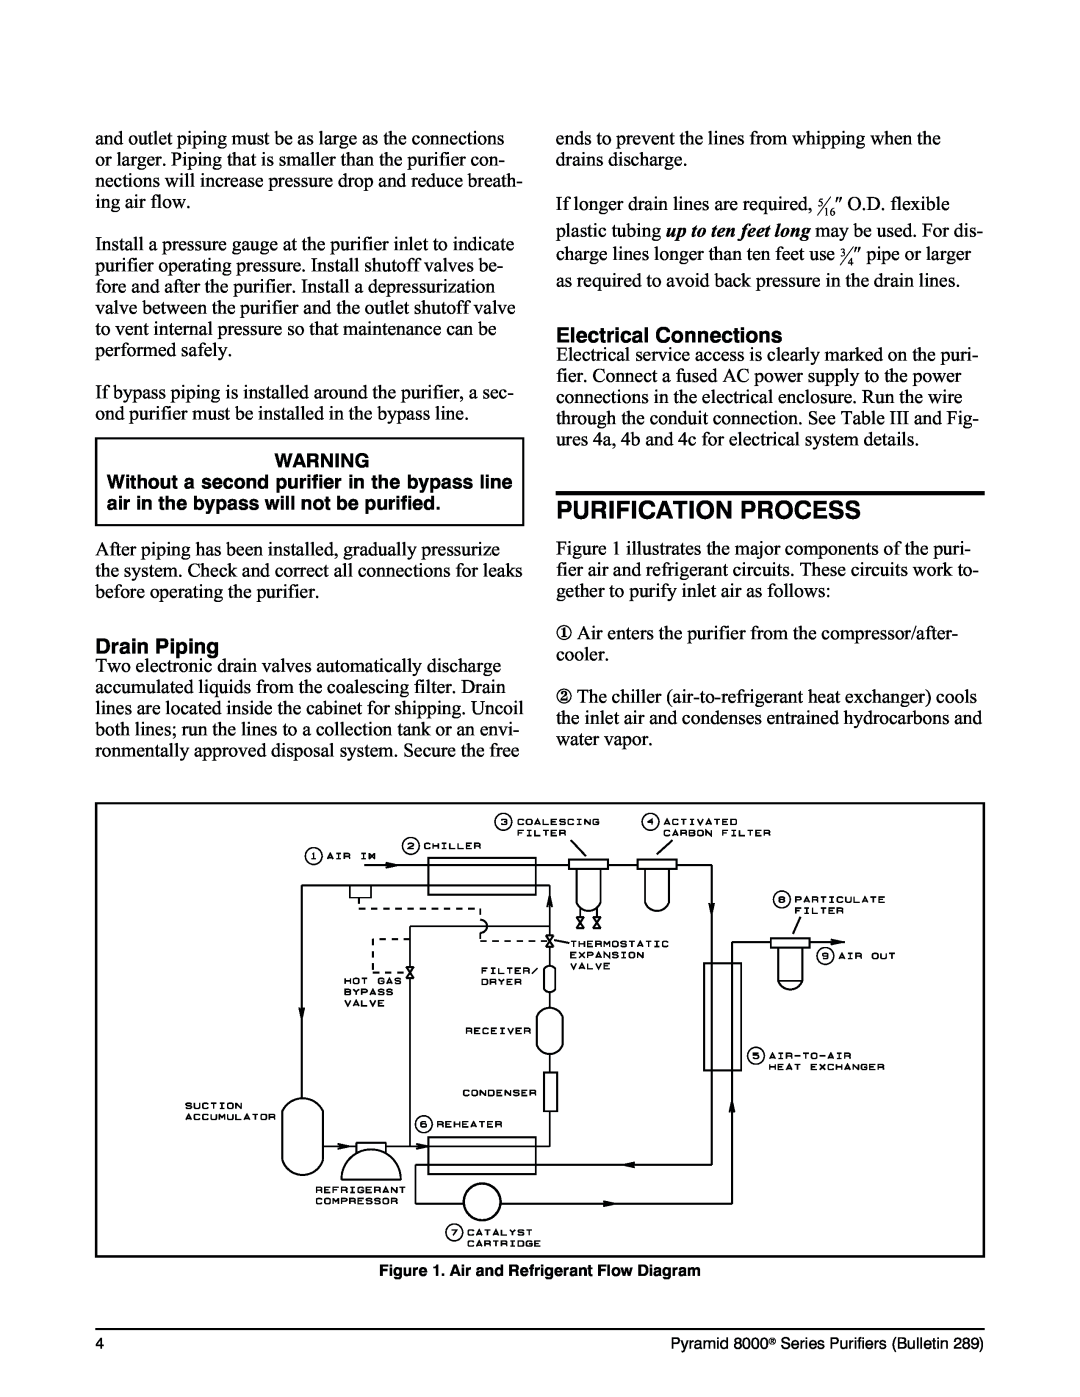 Deltech Fitness 8000 instruction manual Purification Process, Drain Piping, Electrical Connections 